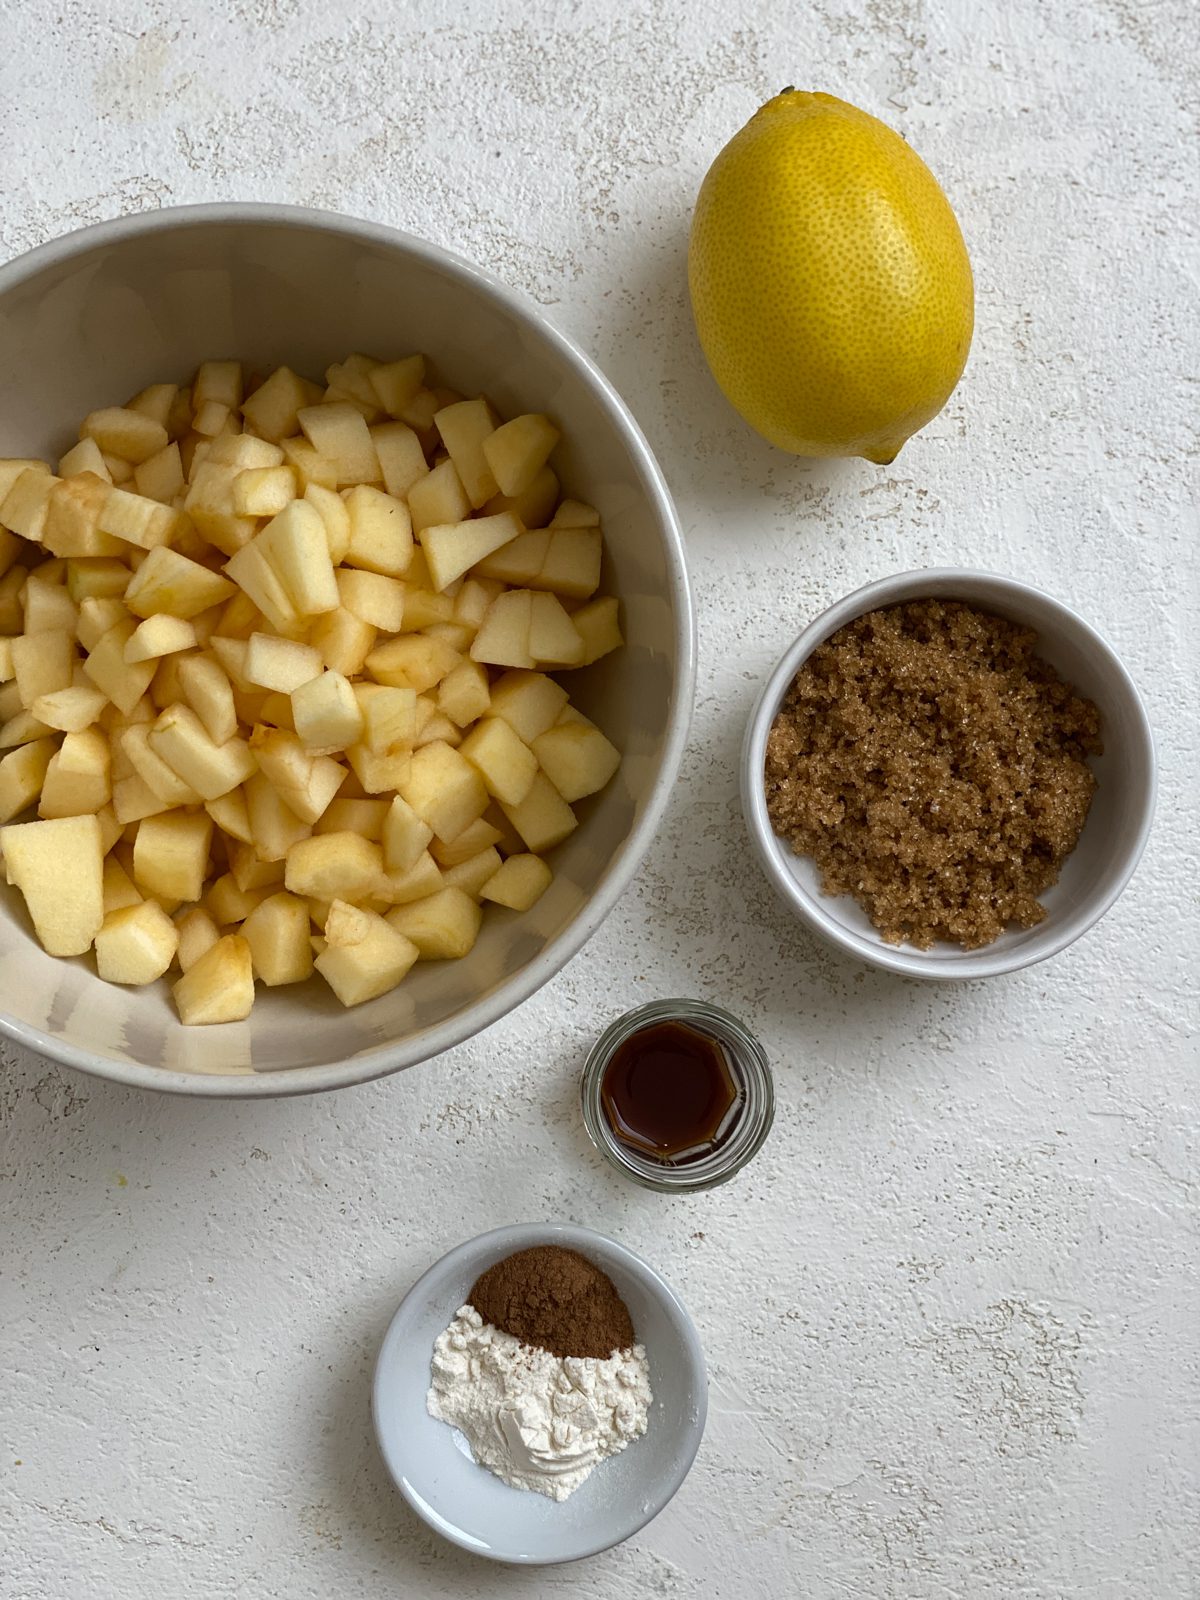 ingredients for Vegan Apple Pie Baked Apples measured out on a white surface